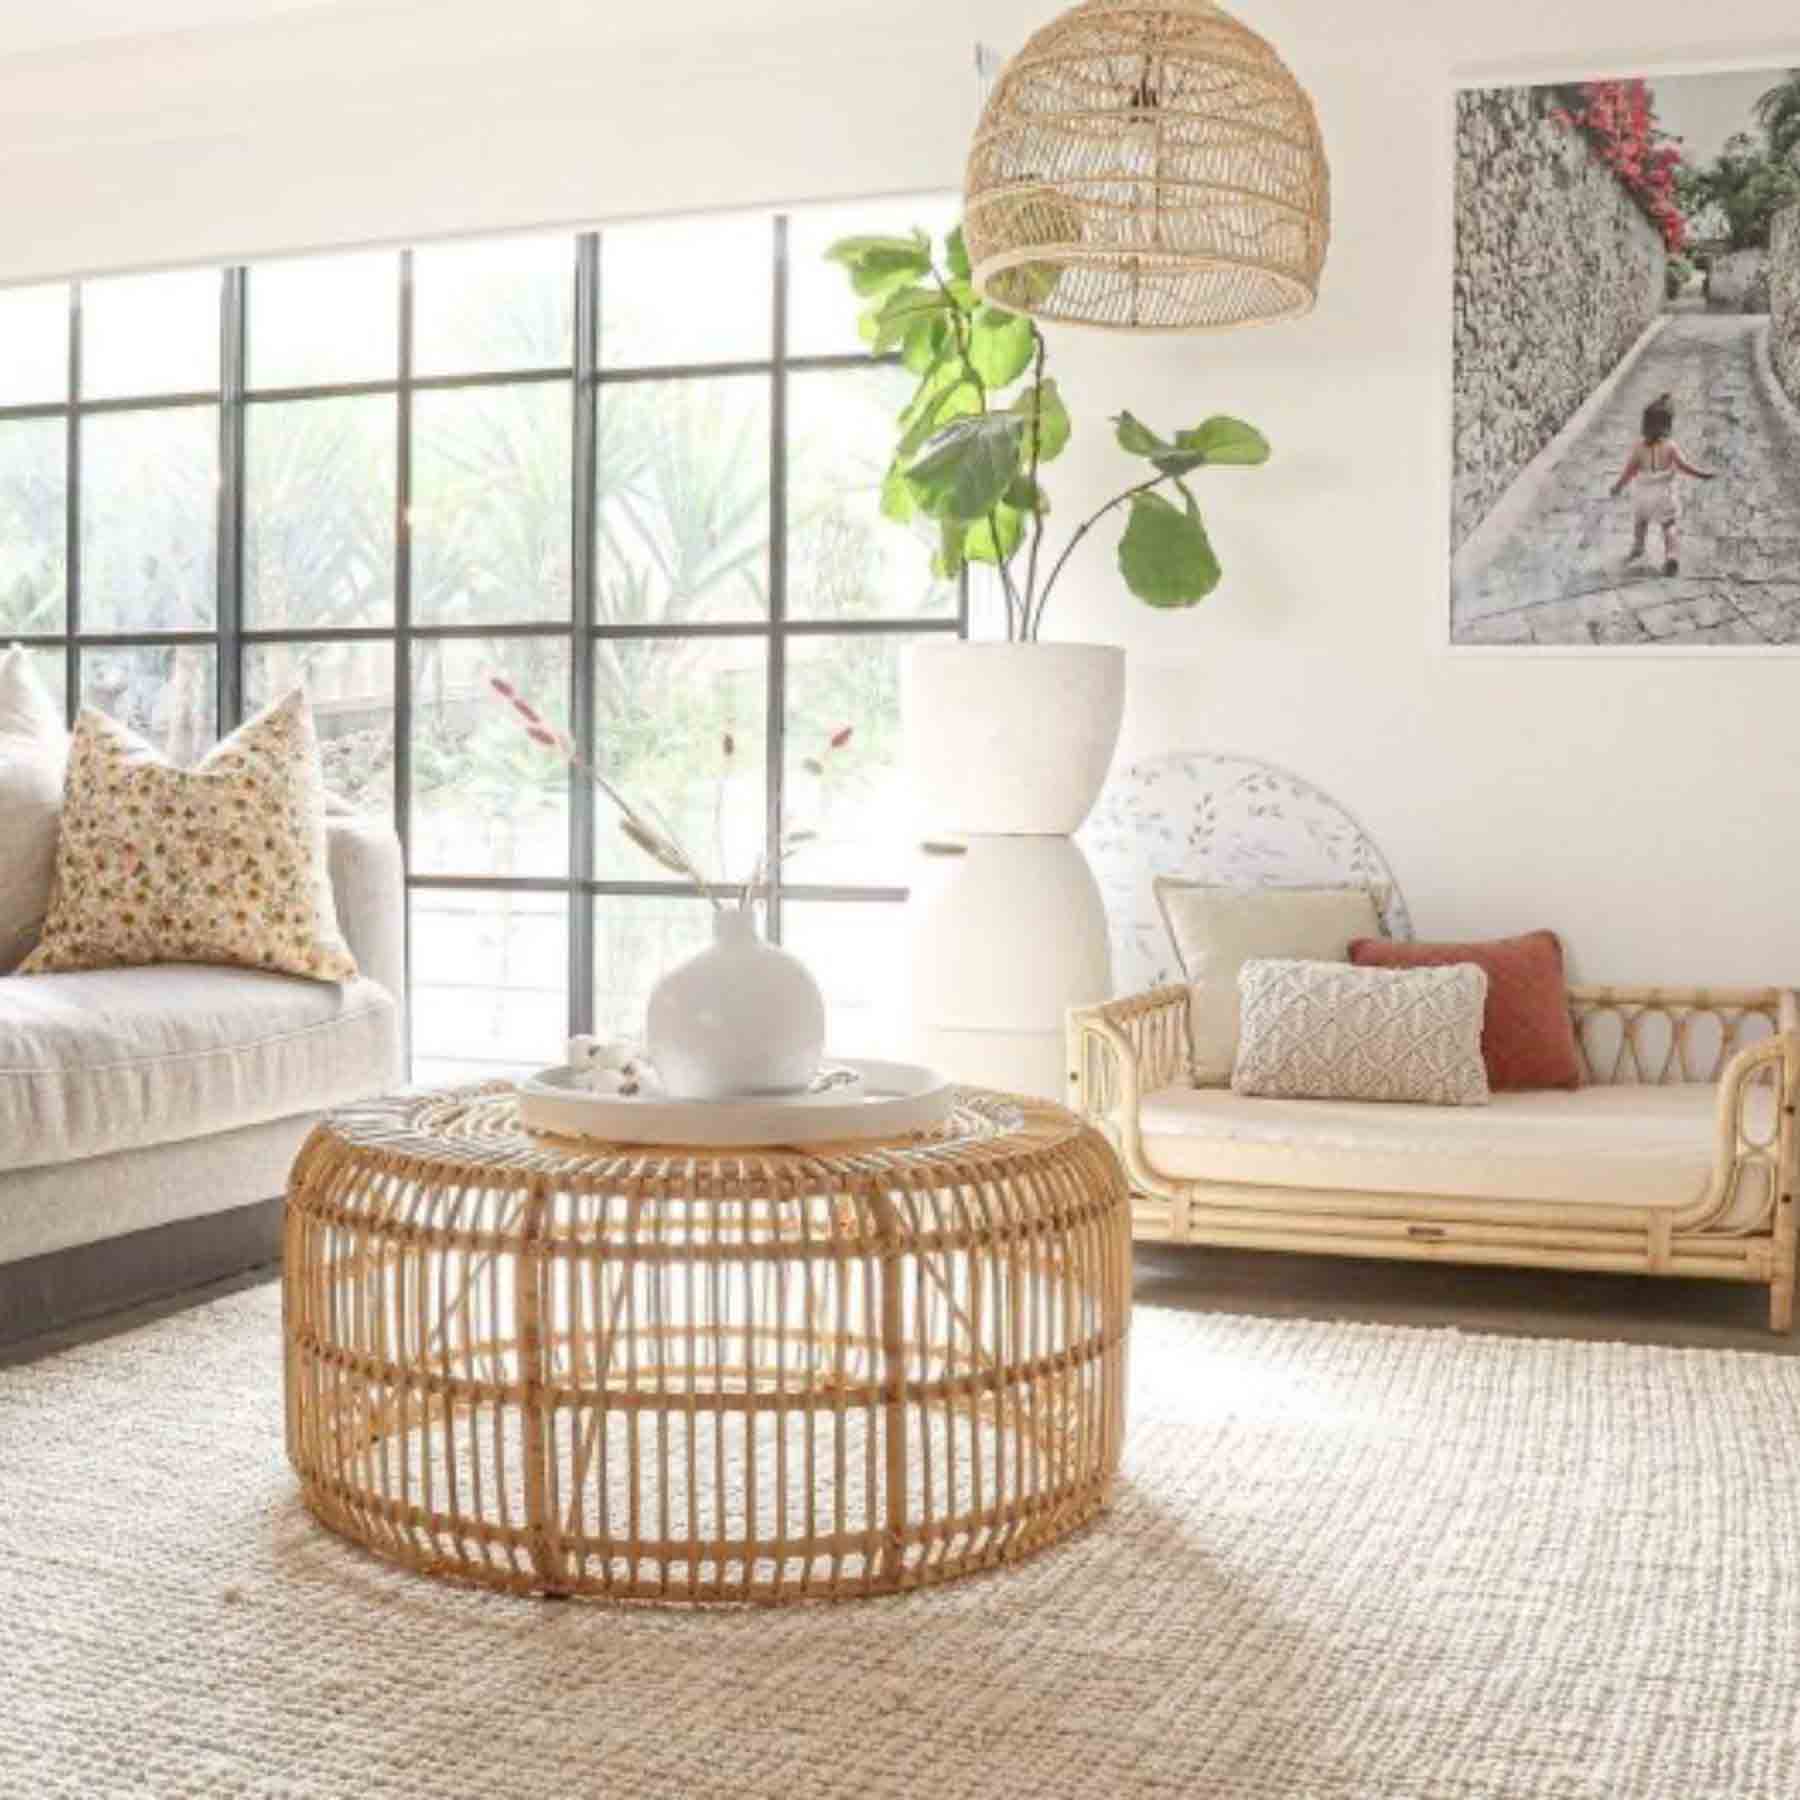 infusing vitality into every nook rattan pendant lights seamlessly bring a touch of nature to your living space